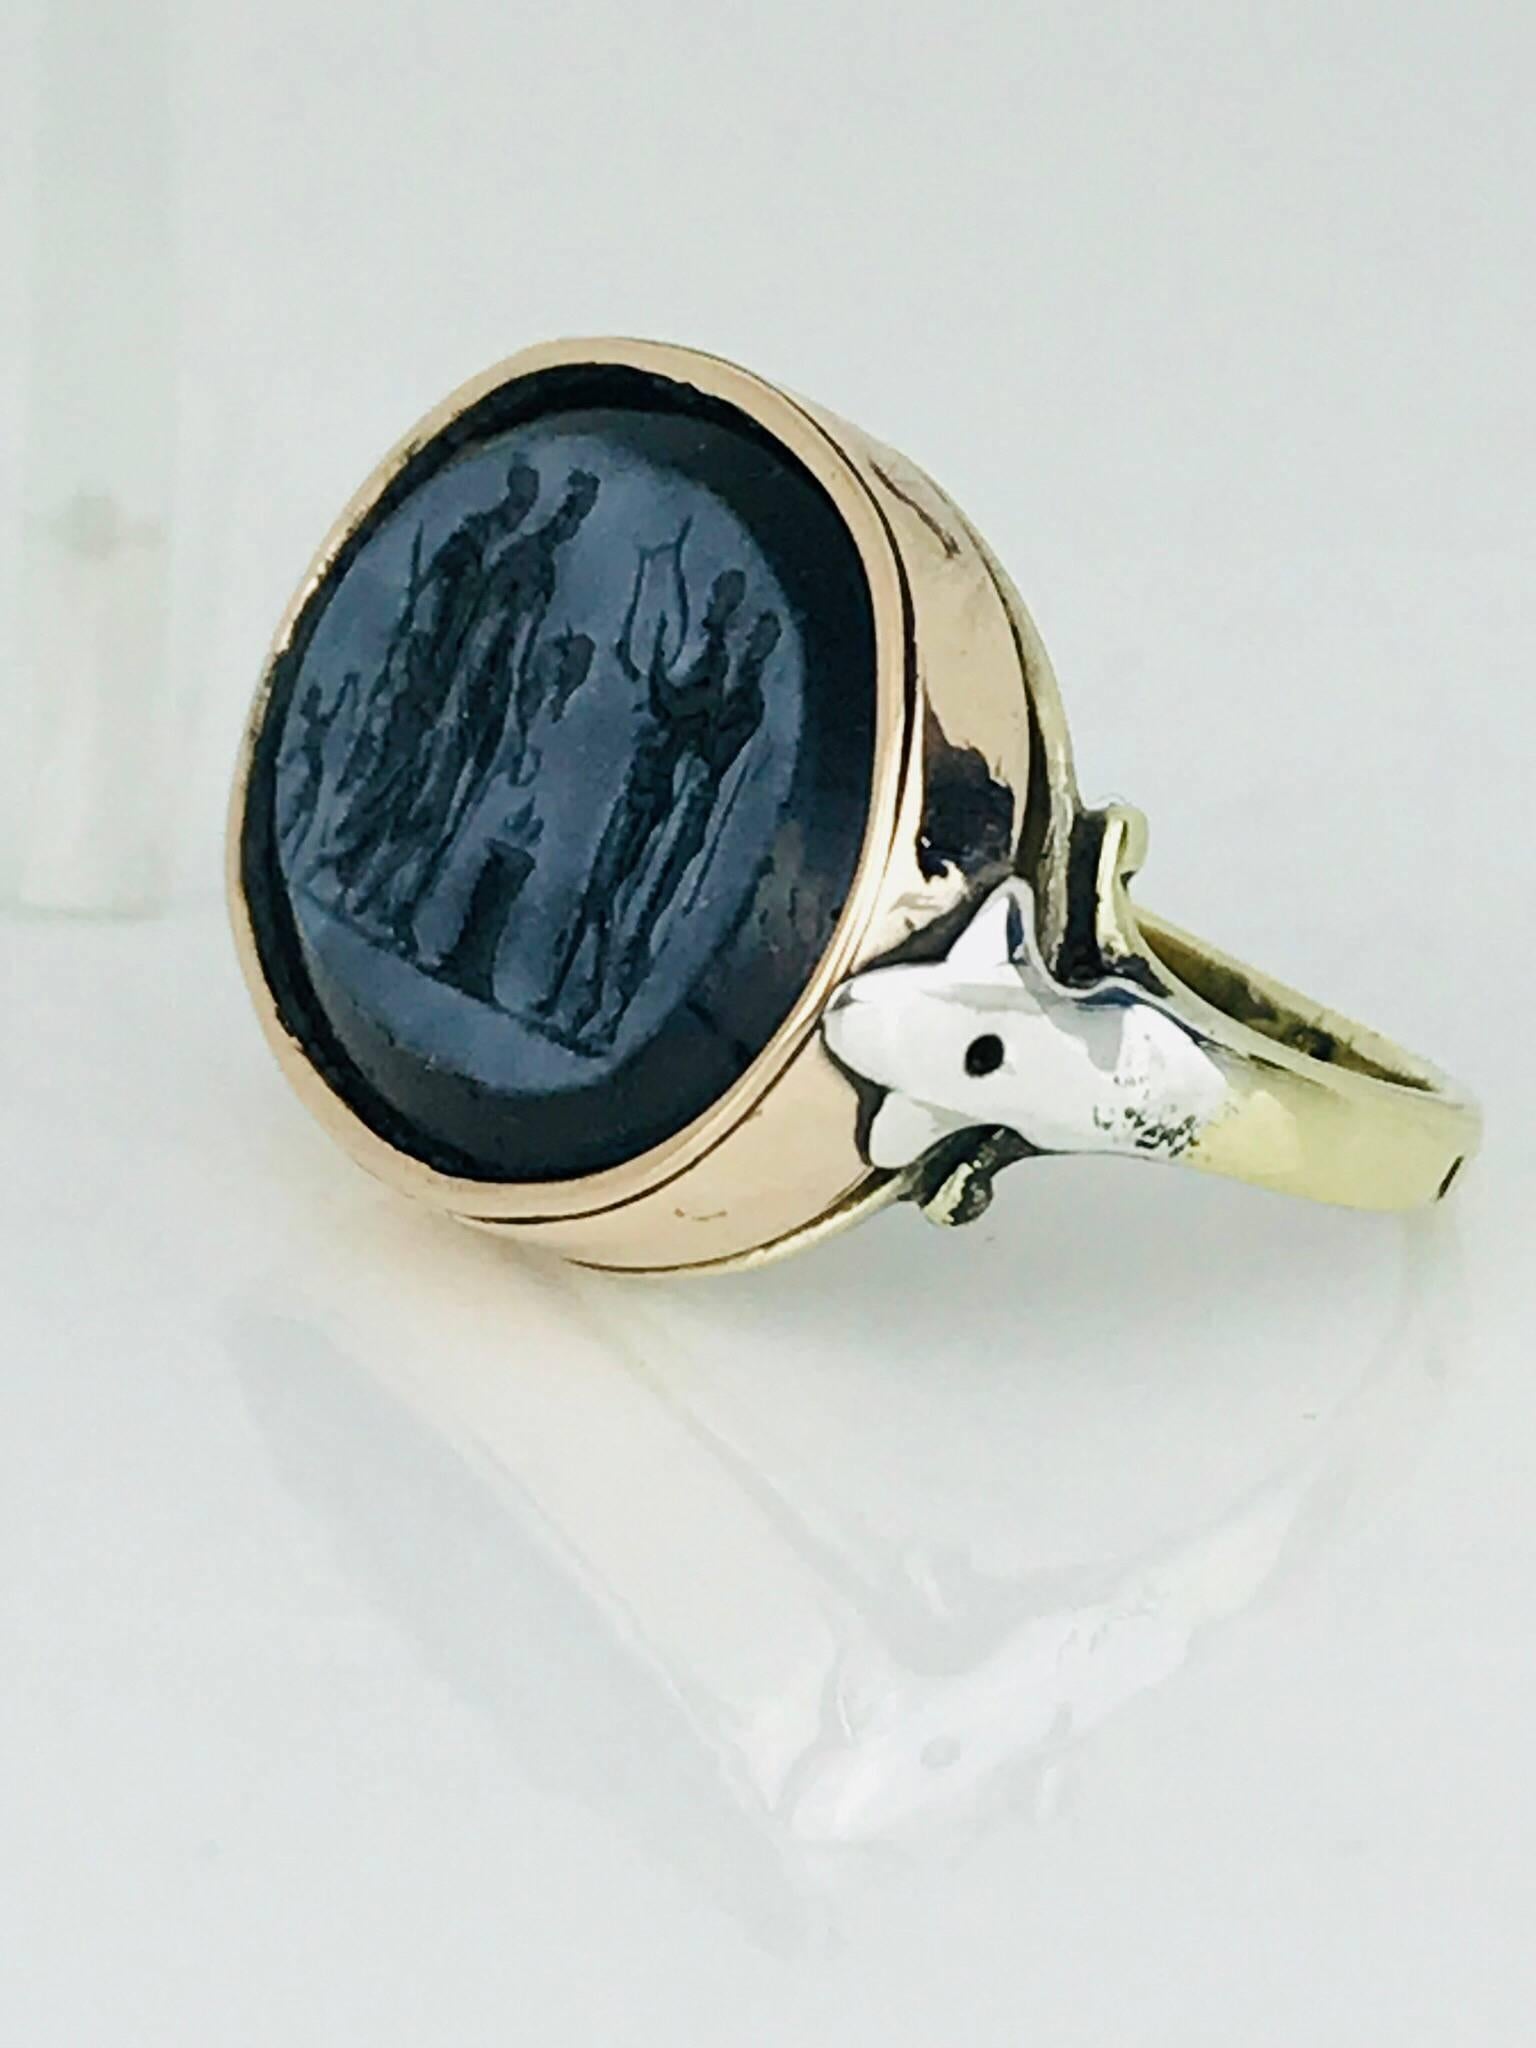 14 carat yellow, white and rose gold ring features a bezel-set black onyx stone, intaglio engraved with a scene from mythology, hand made assembly shows this vintage ring Circa 1935

Face of ring measures 20.90 mm long x 15.75 mm wide x 4.75 mm